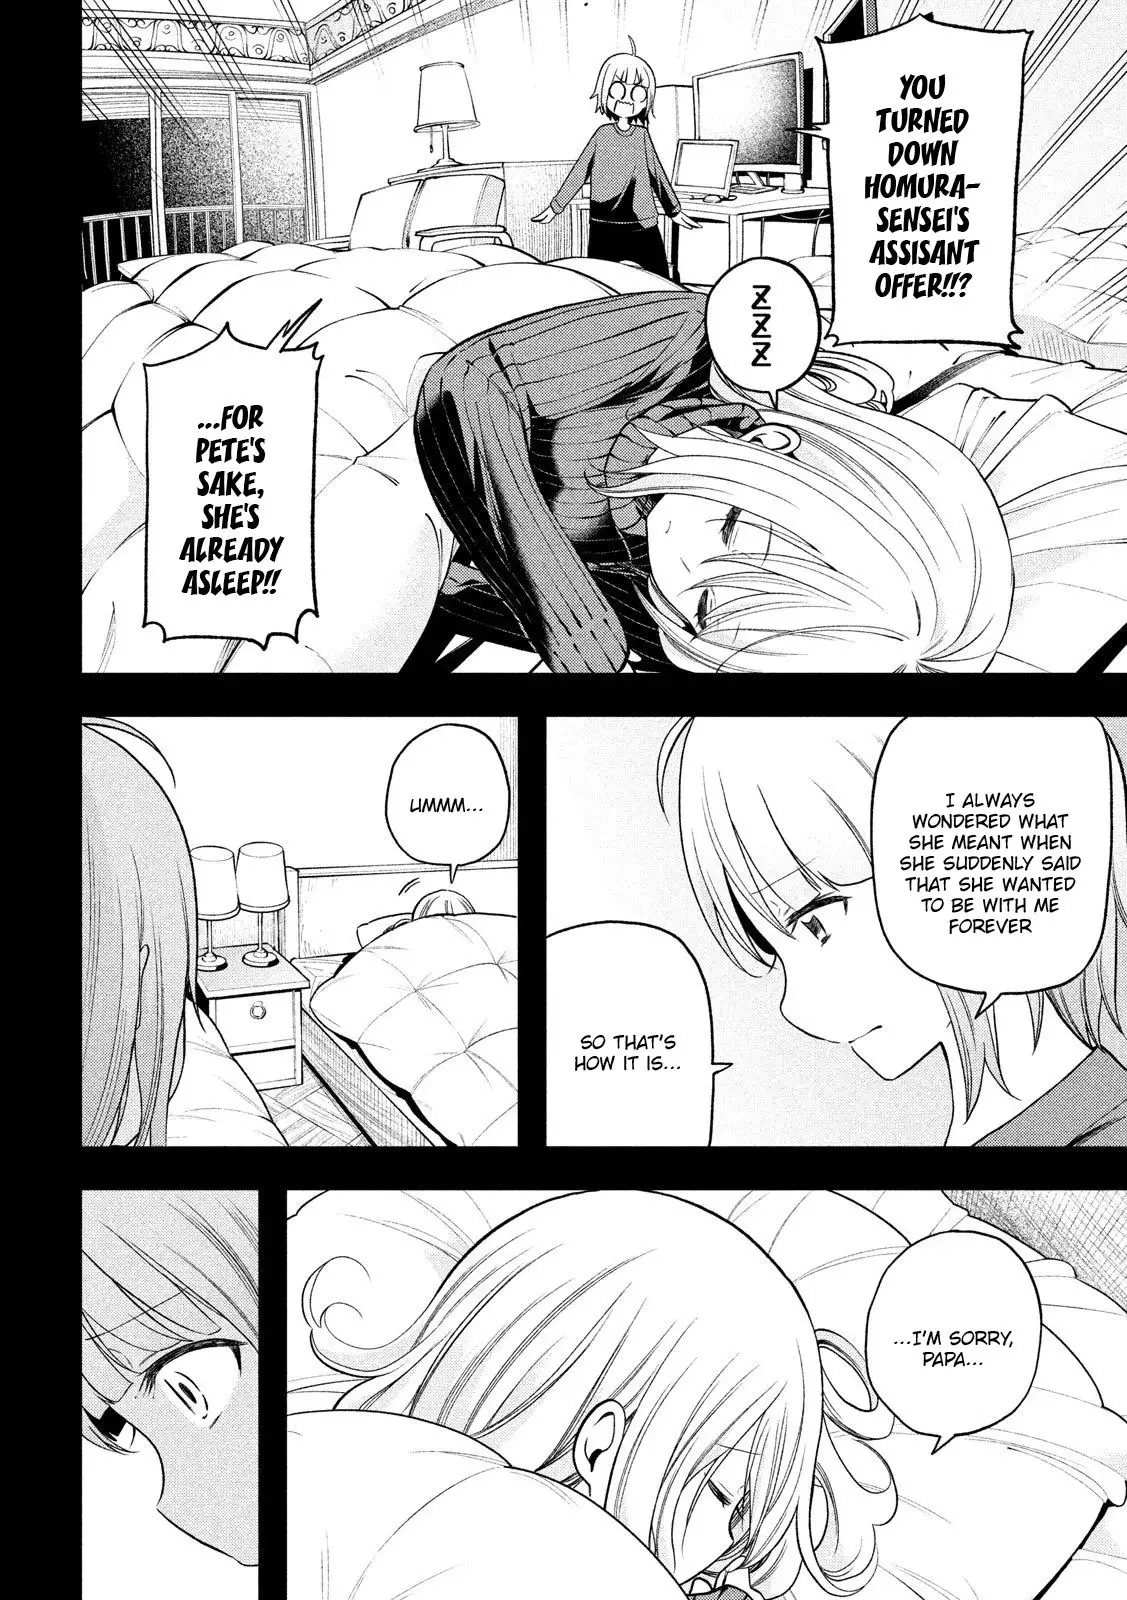 Why are you here Sensei!? - 90 page 7